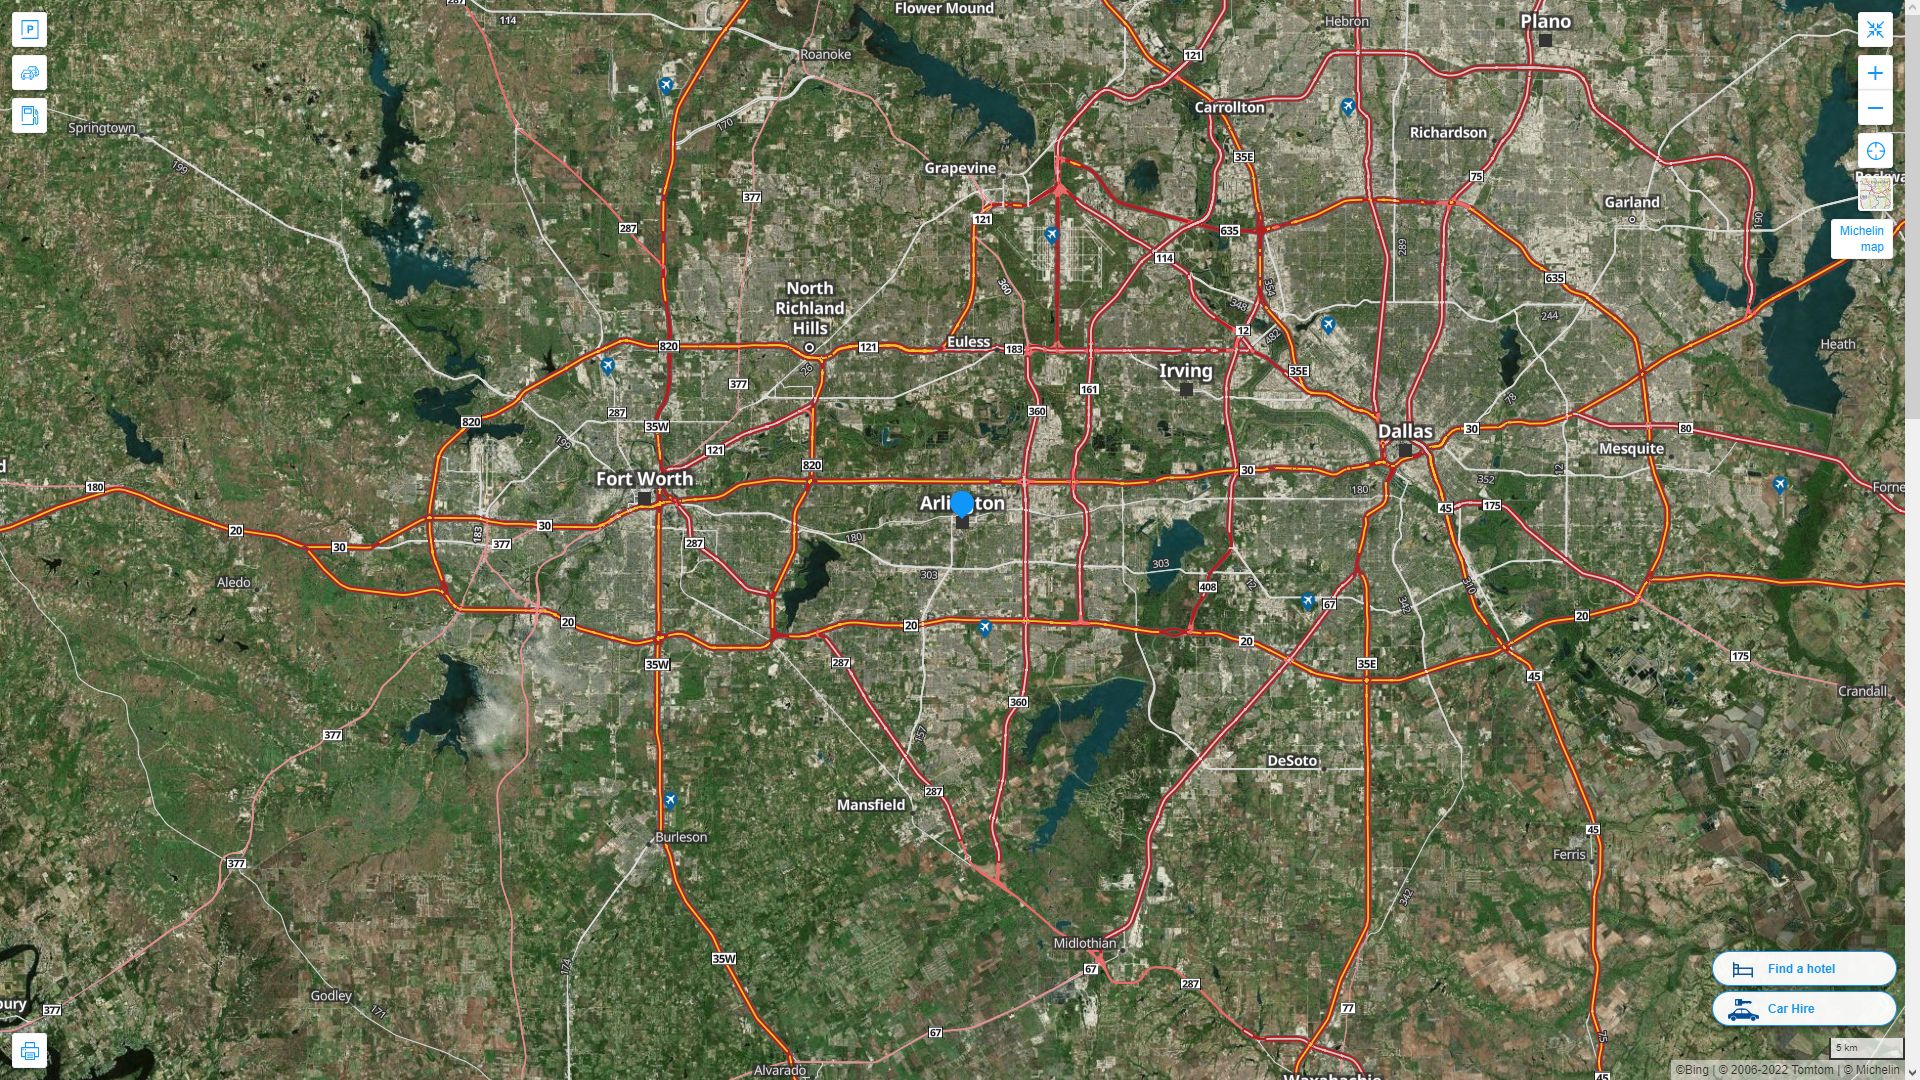 Arlington Texas Highway and Road Map with Satellite View